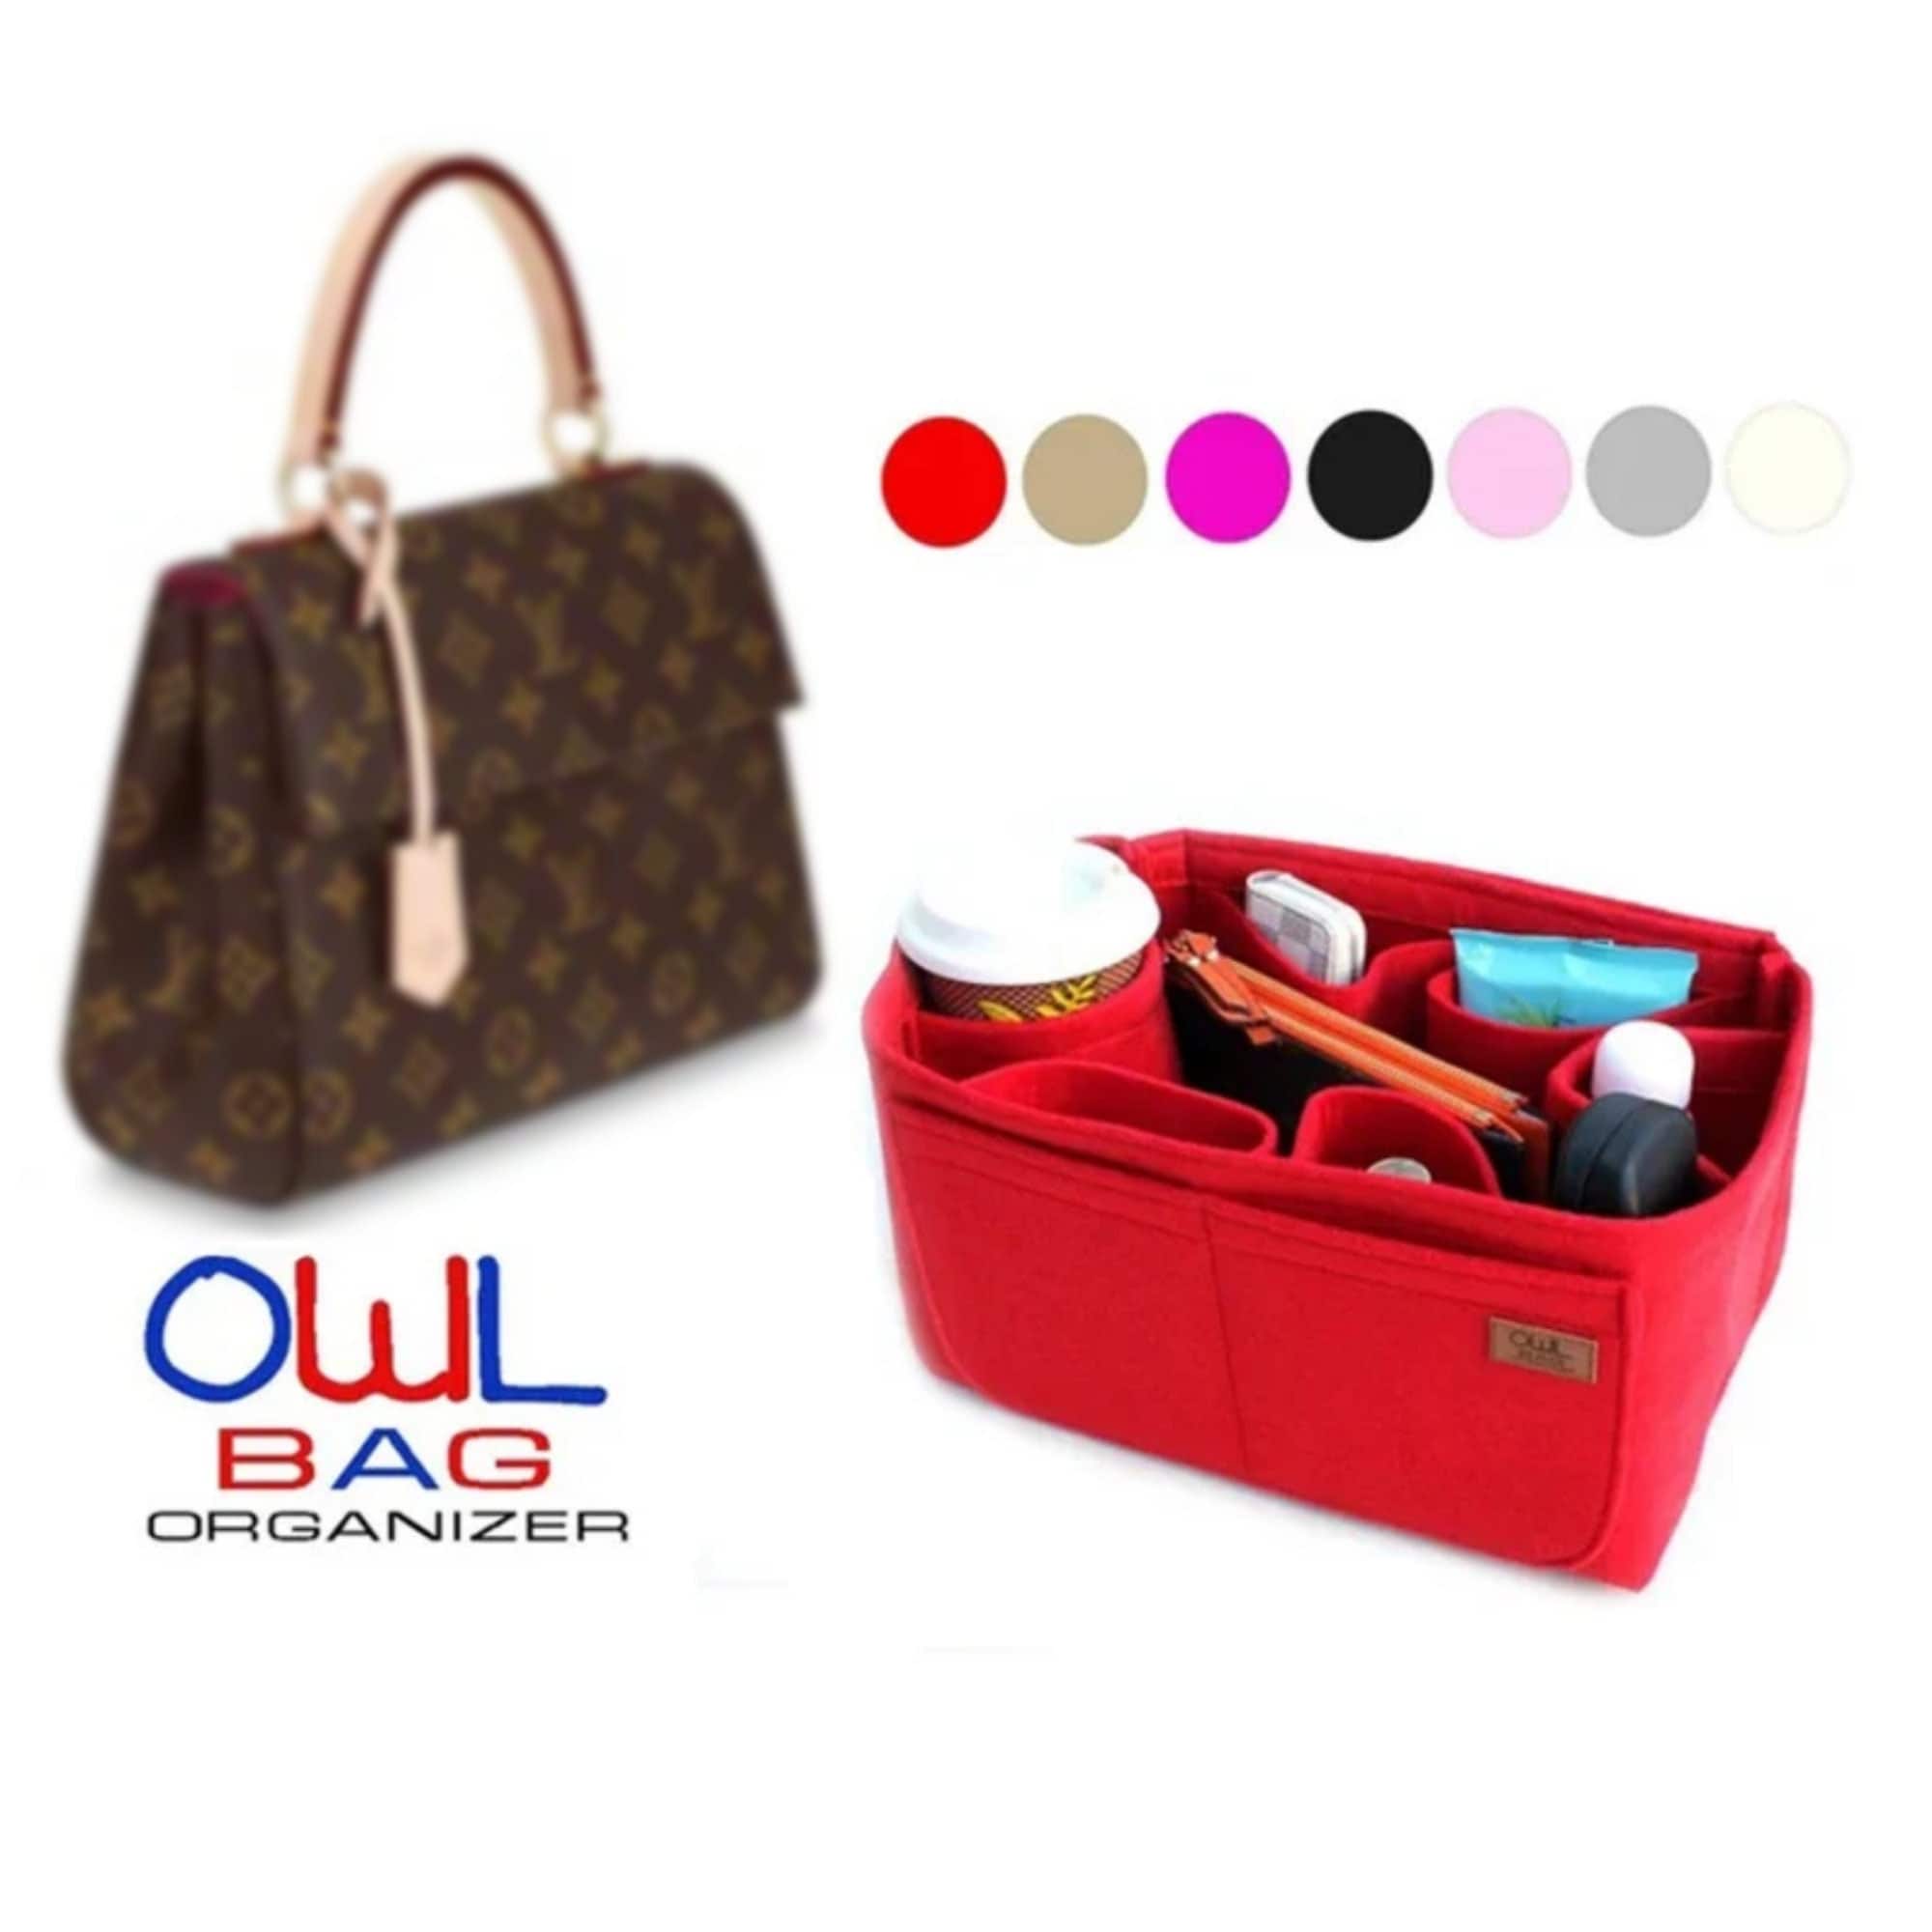  Purse Organizer Insert is applicable to LV Cluny mini